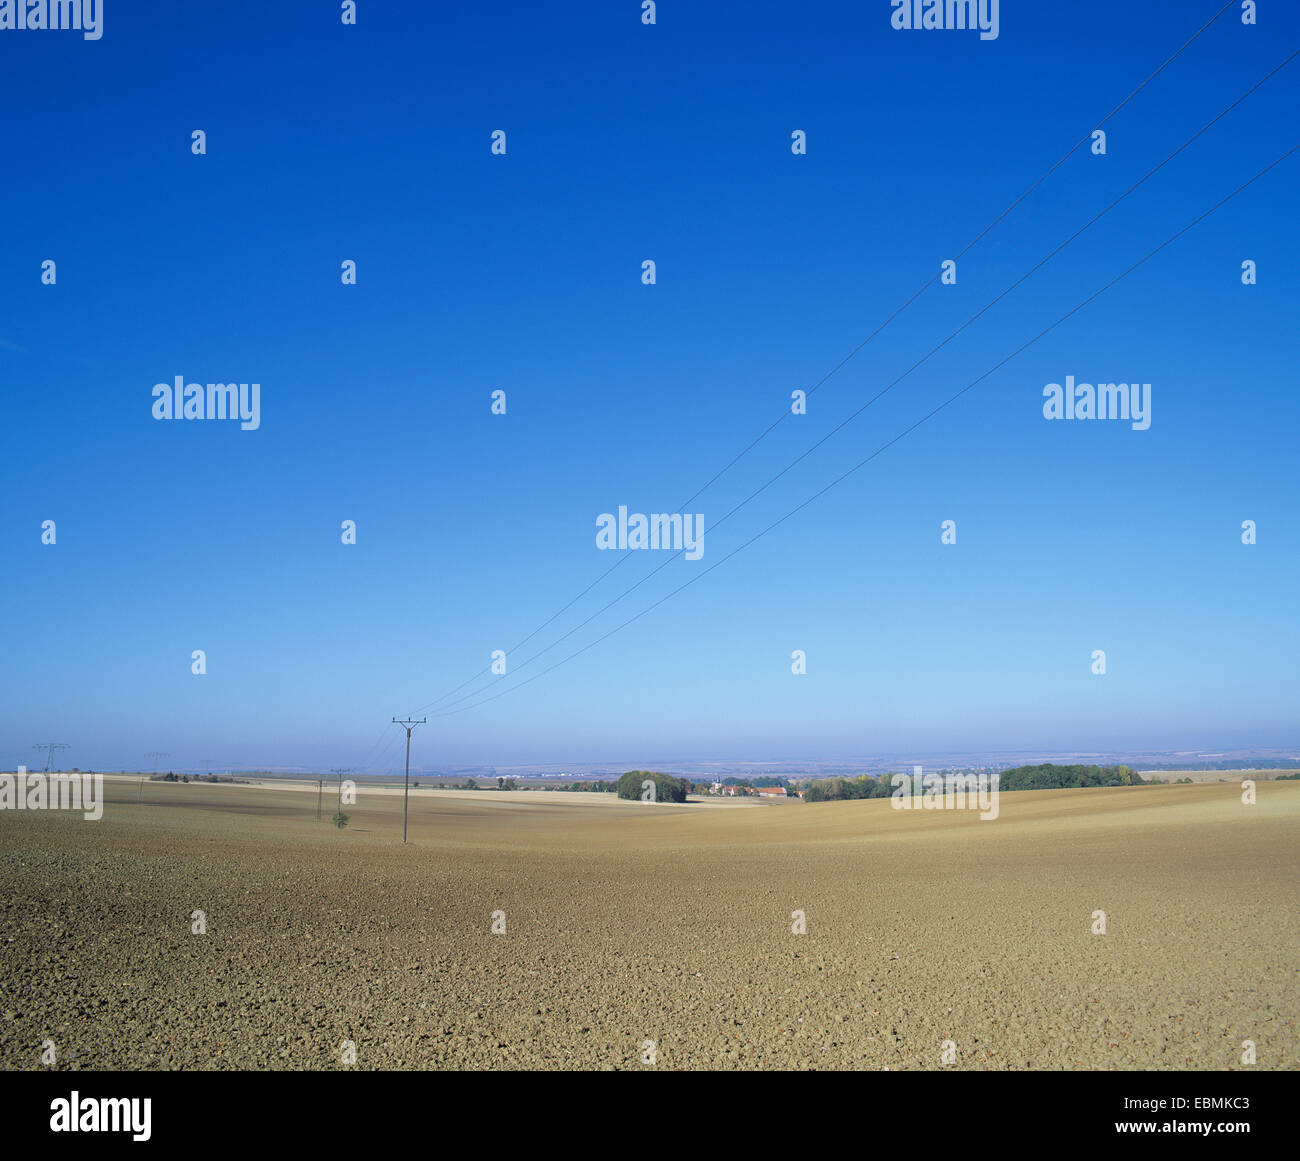 Arable desert, harvested field and power lines, Zimmern, Thuringia, Germany Stock Photo